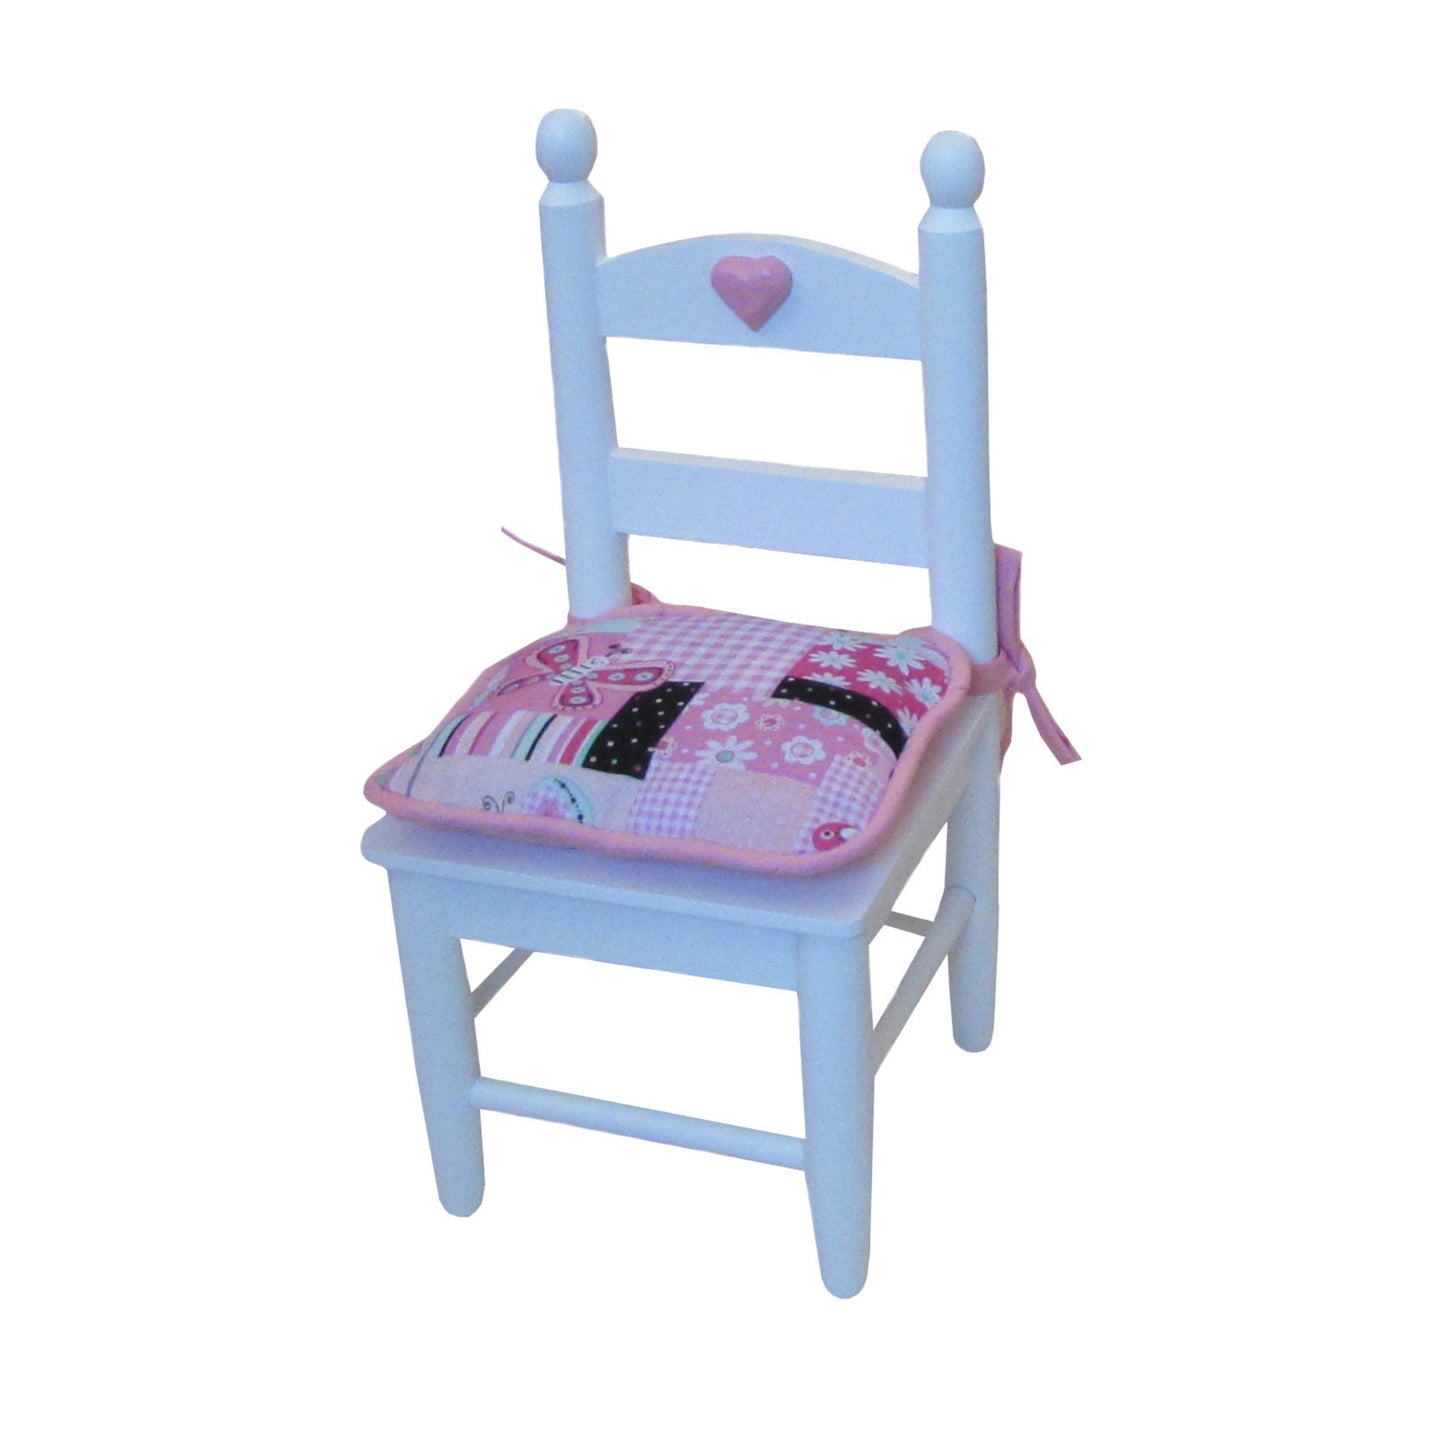 Pink Butterfly Print Doll Chair Cushion for 18-inch dolls